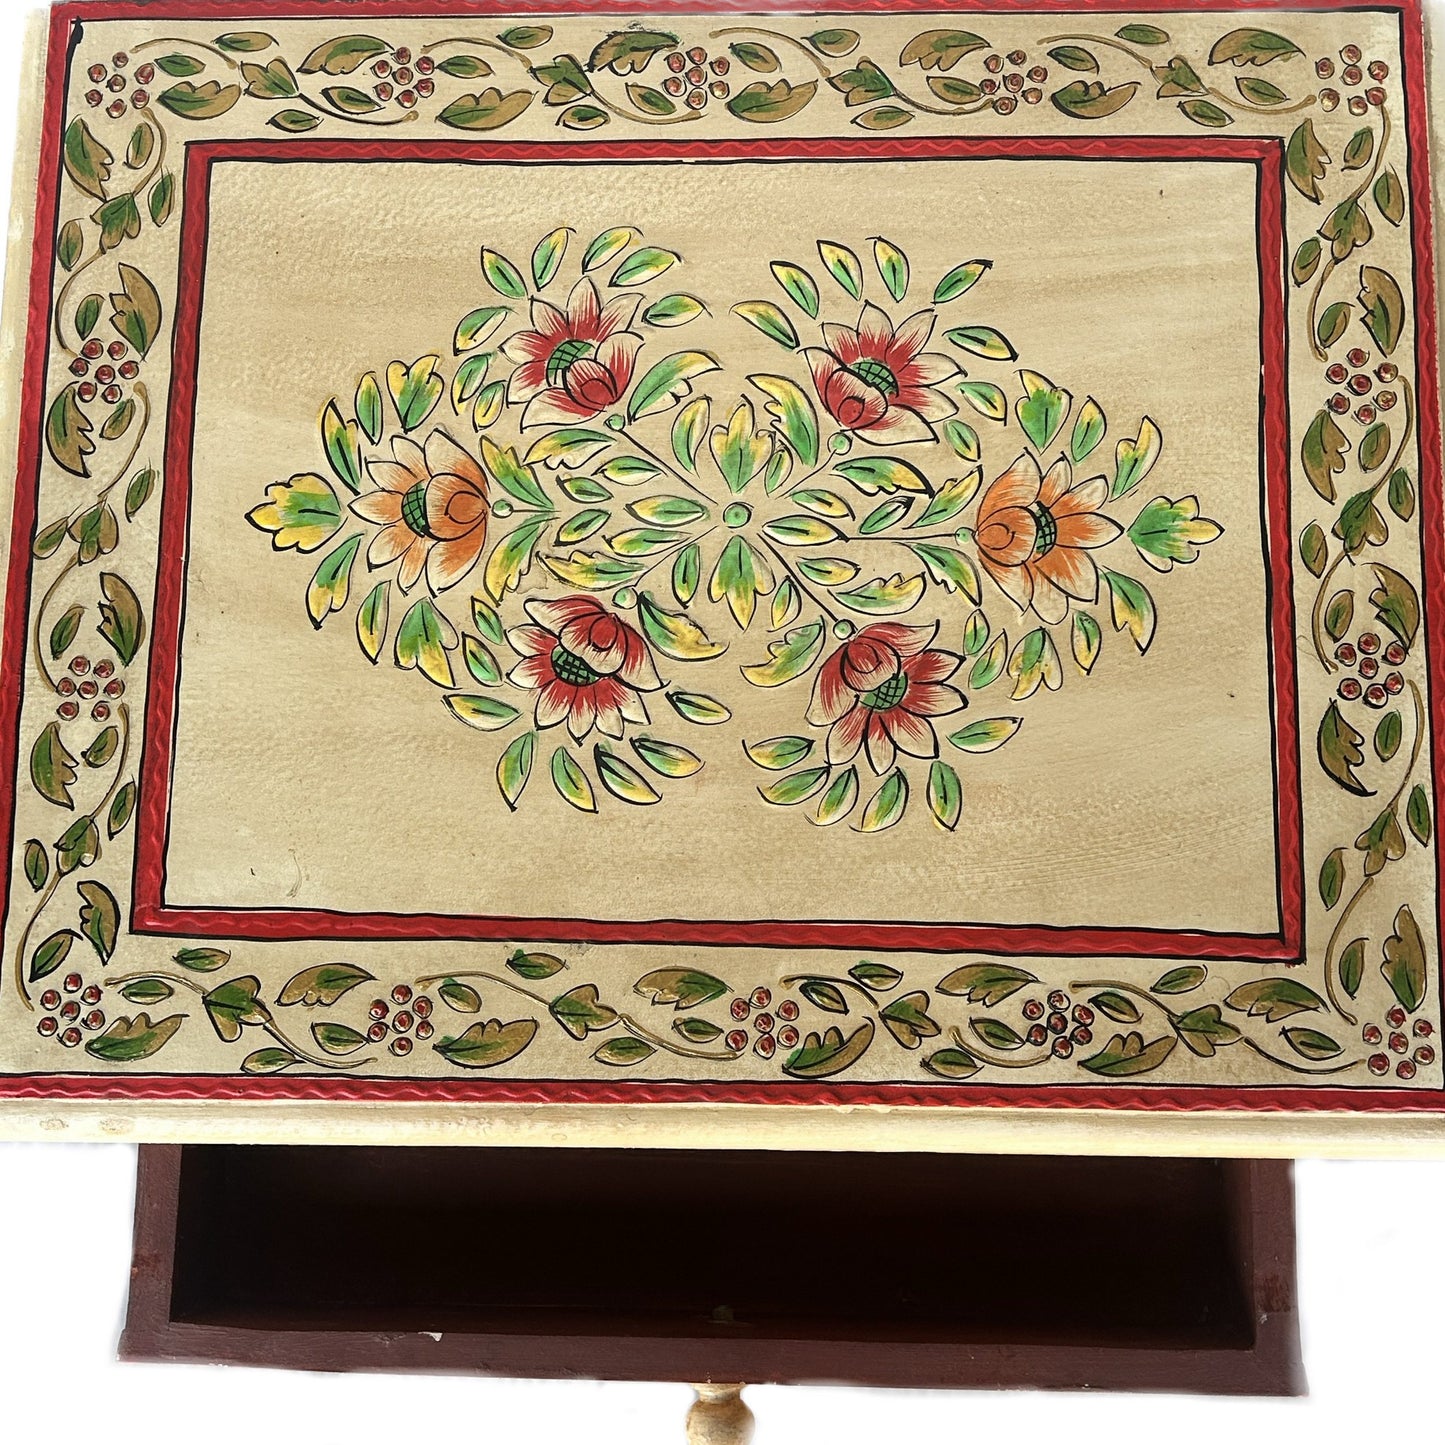 Hand painted Indian chest bedside table - Art. Chest_IRF